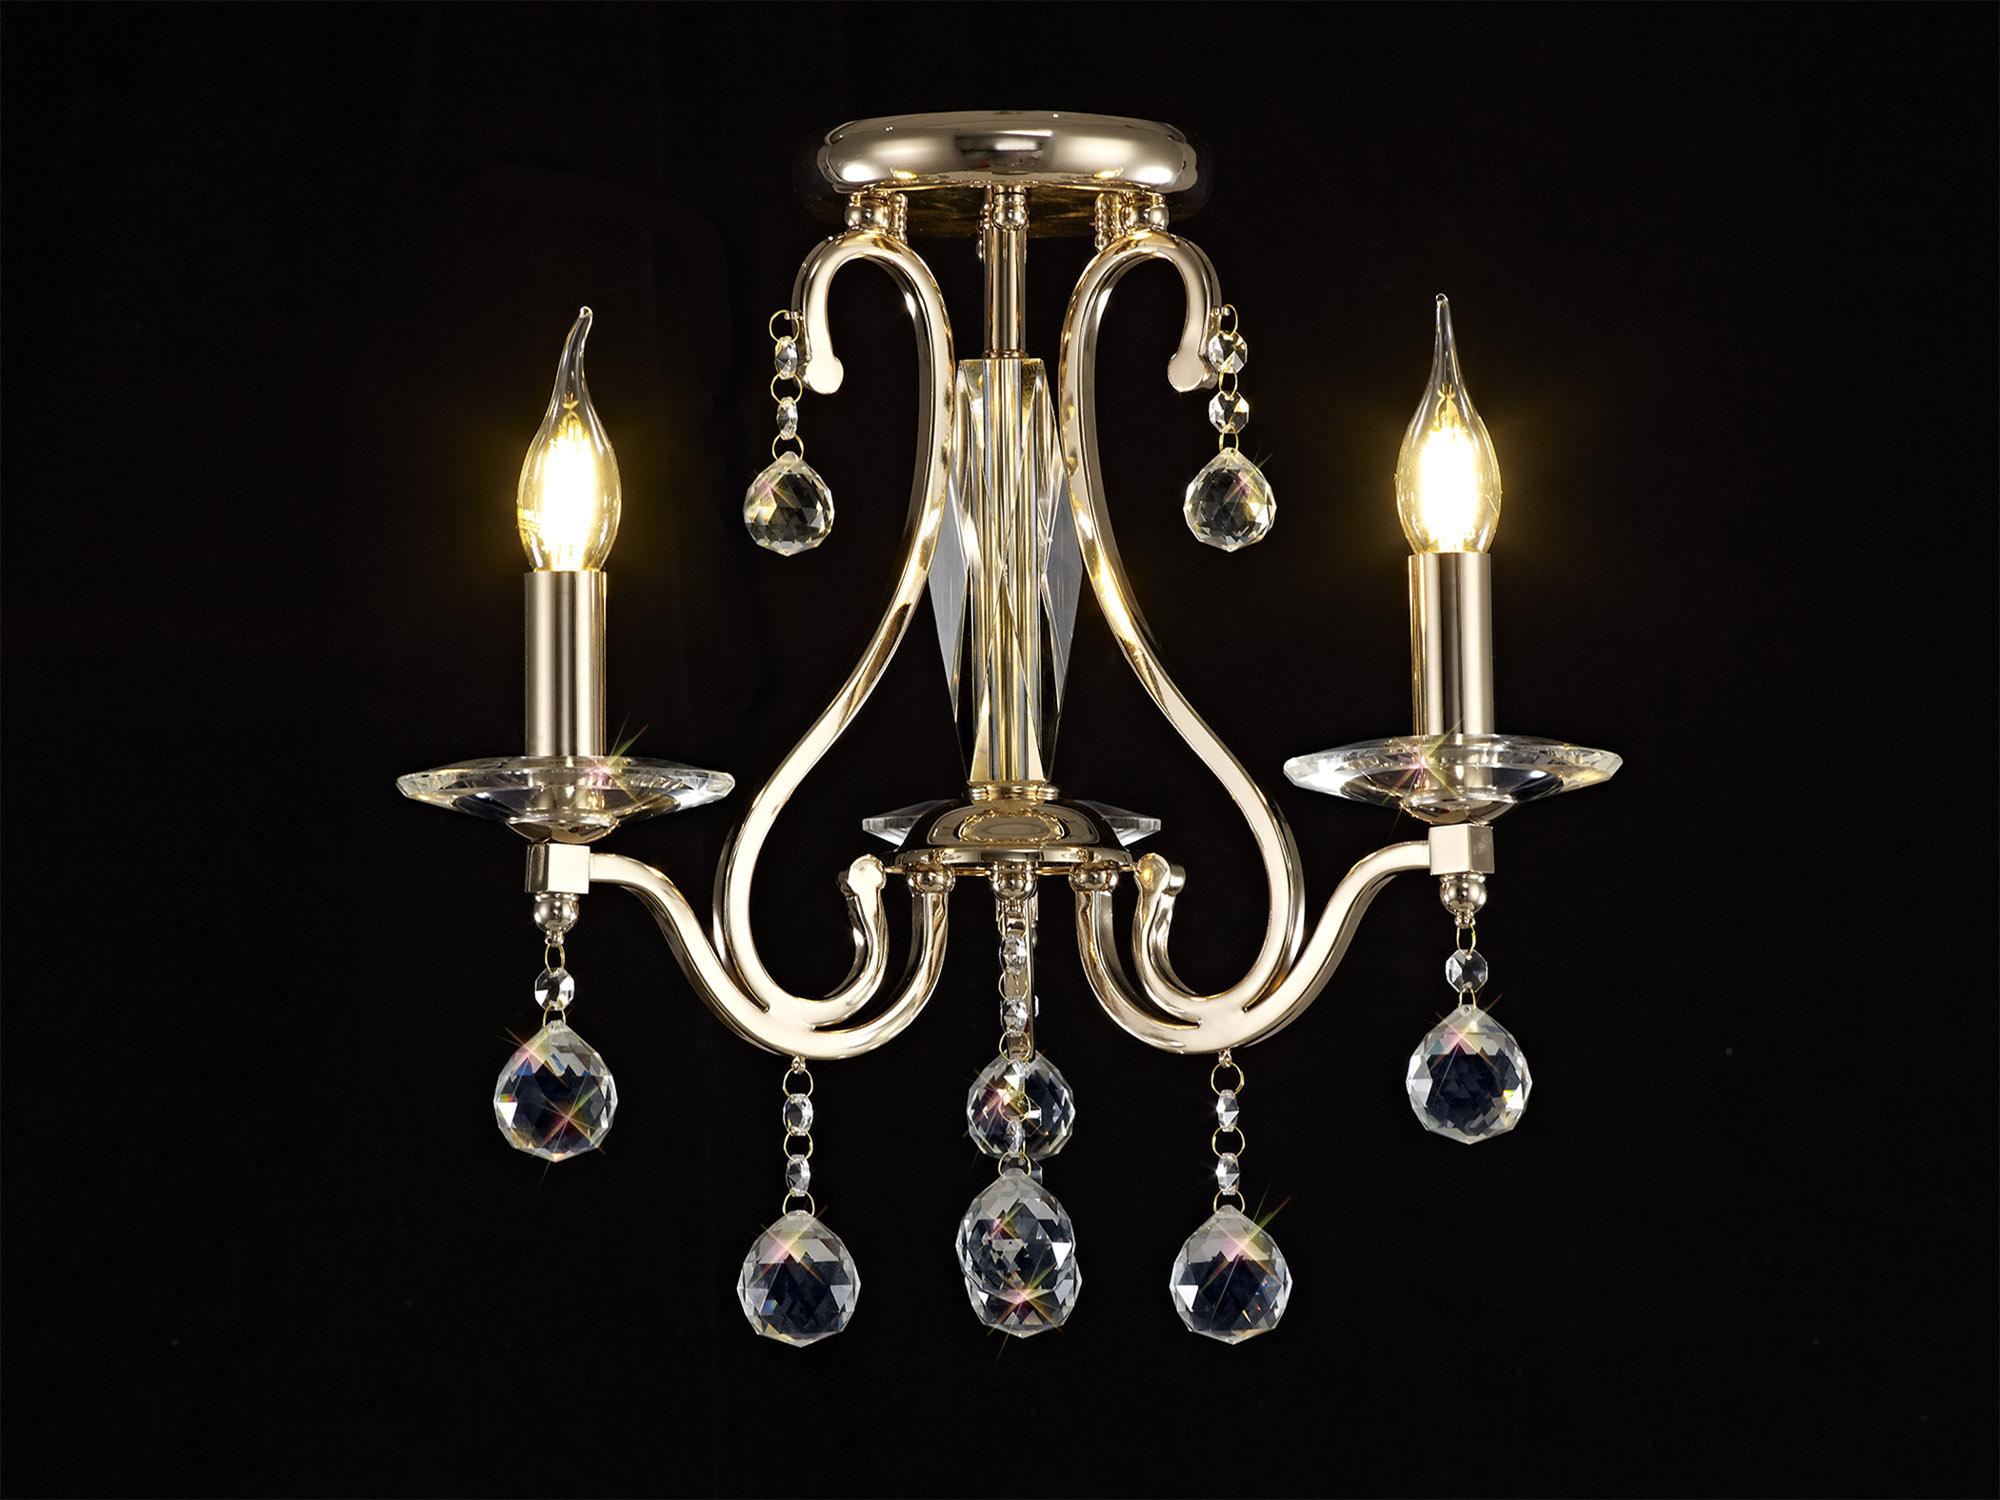 IL30213  Bianco Crystal Ceiling 3 Light French Gold